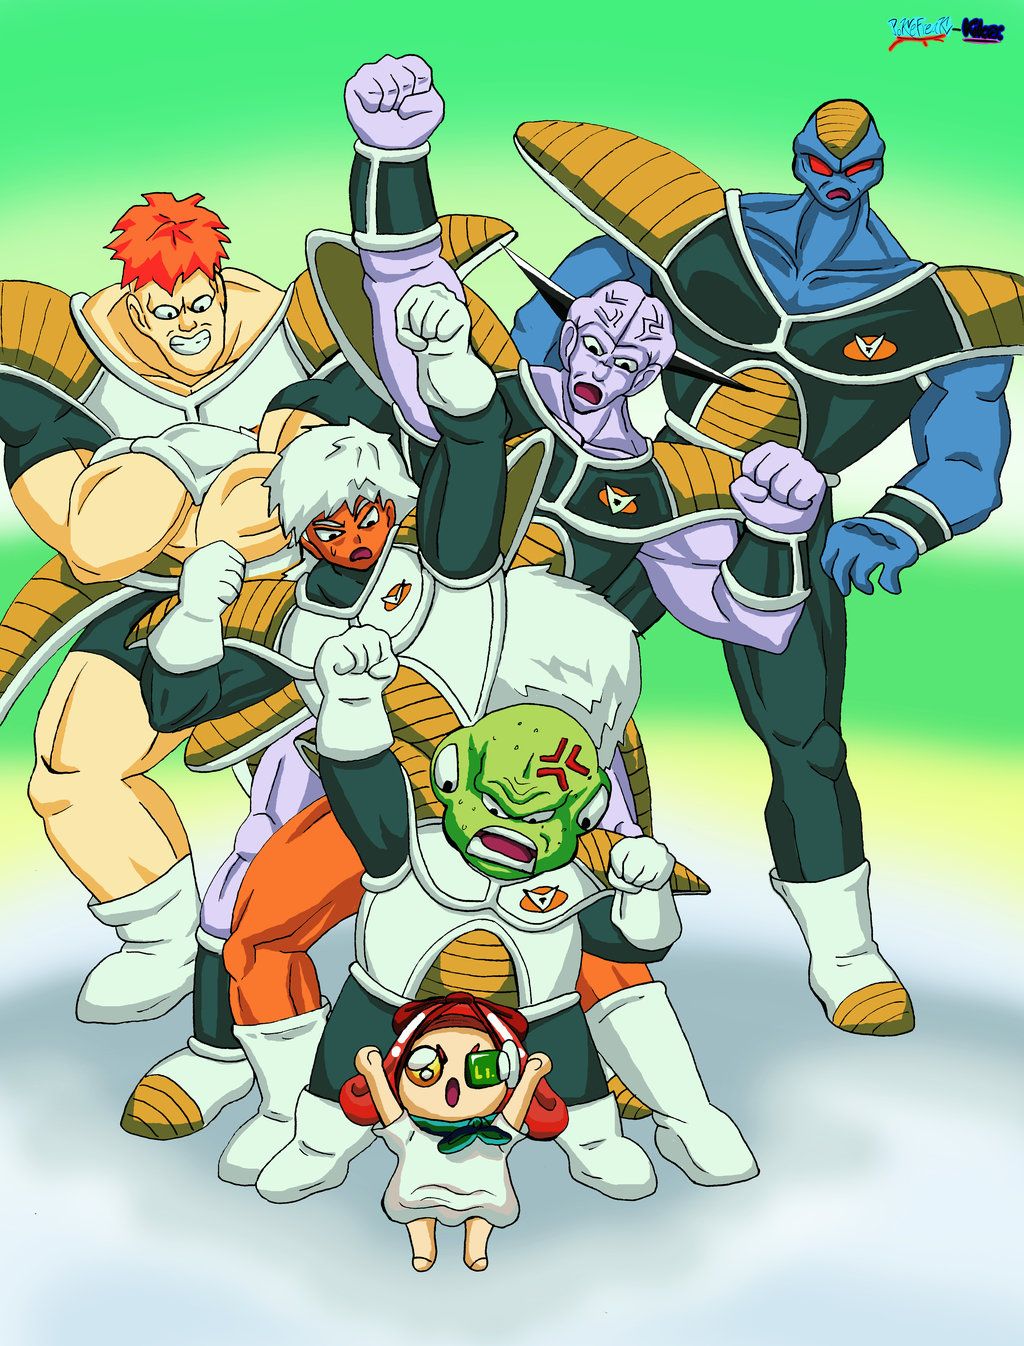 A Day with the Ginyu Force by PokeFreak Kiko on DeviantArt